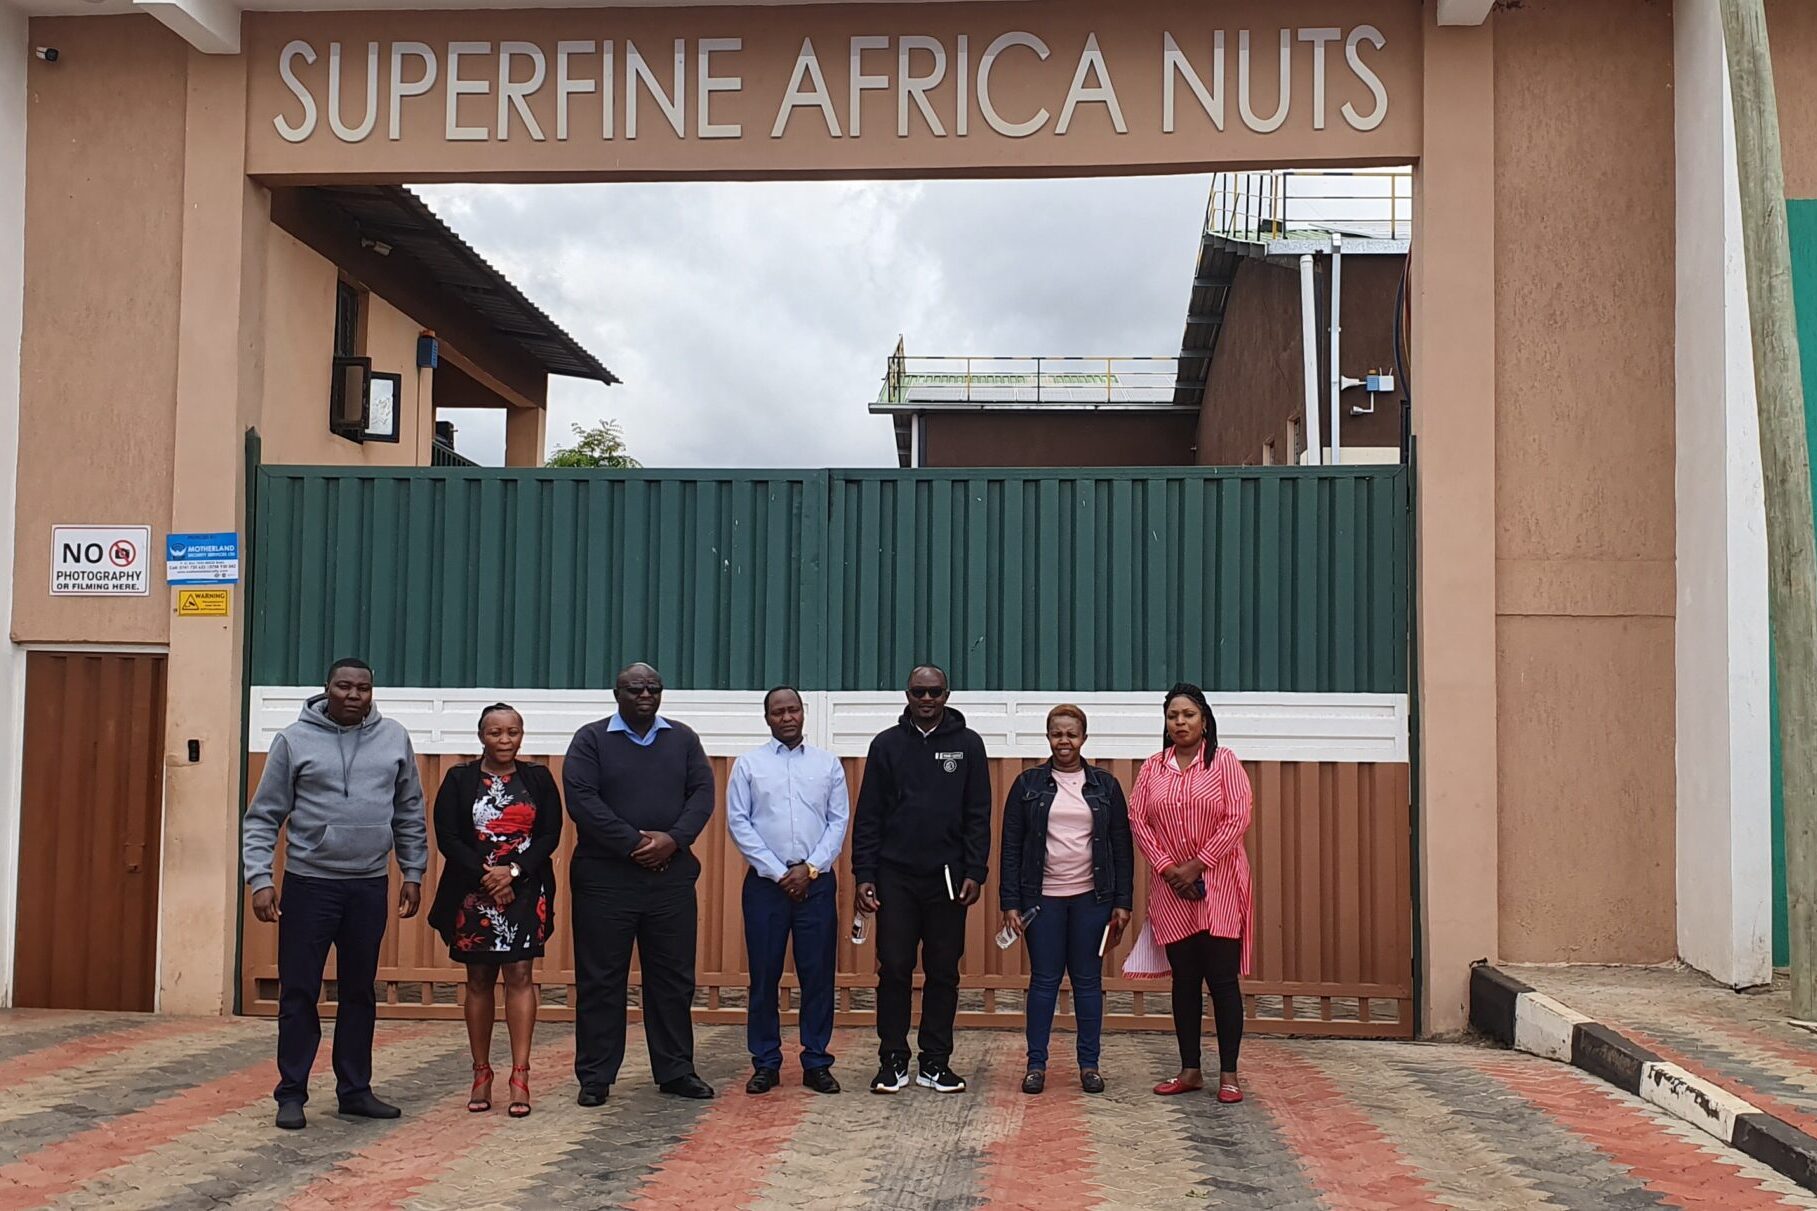 Superfine Africa Nuts employees at the entrance to the cracking facility. Photo credit: Root Capital